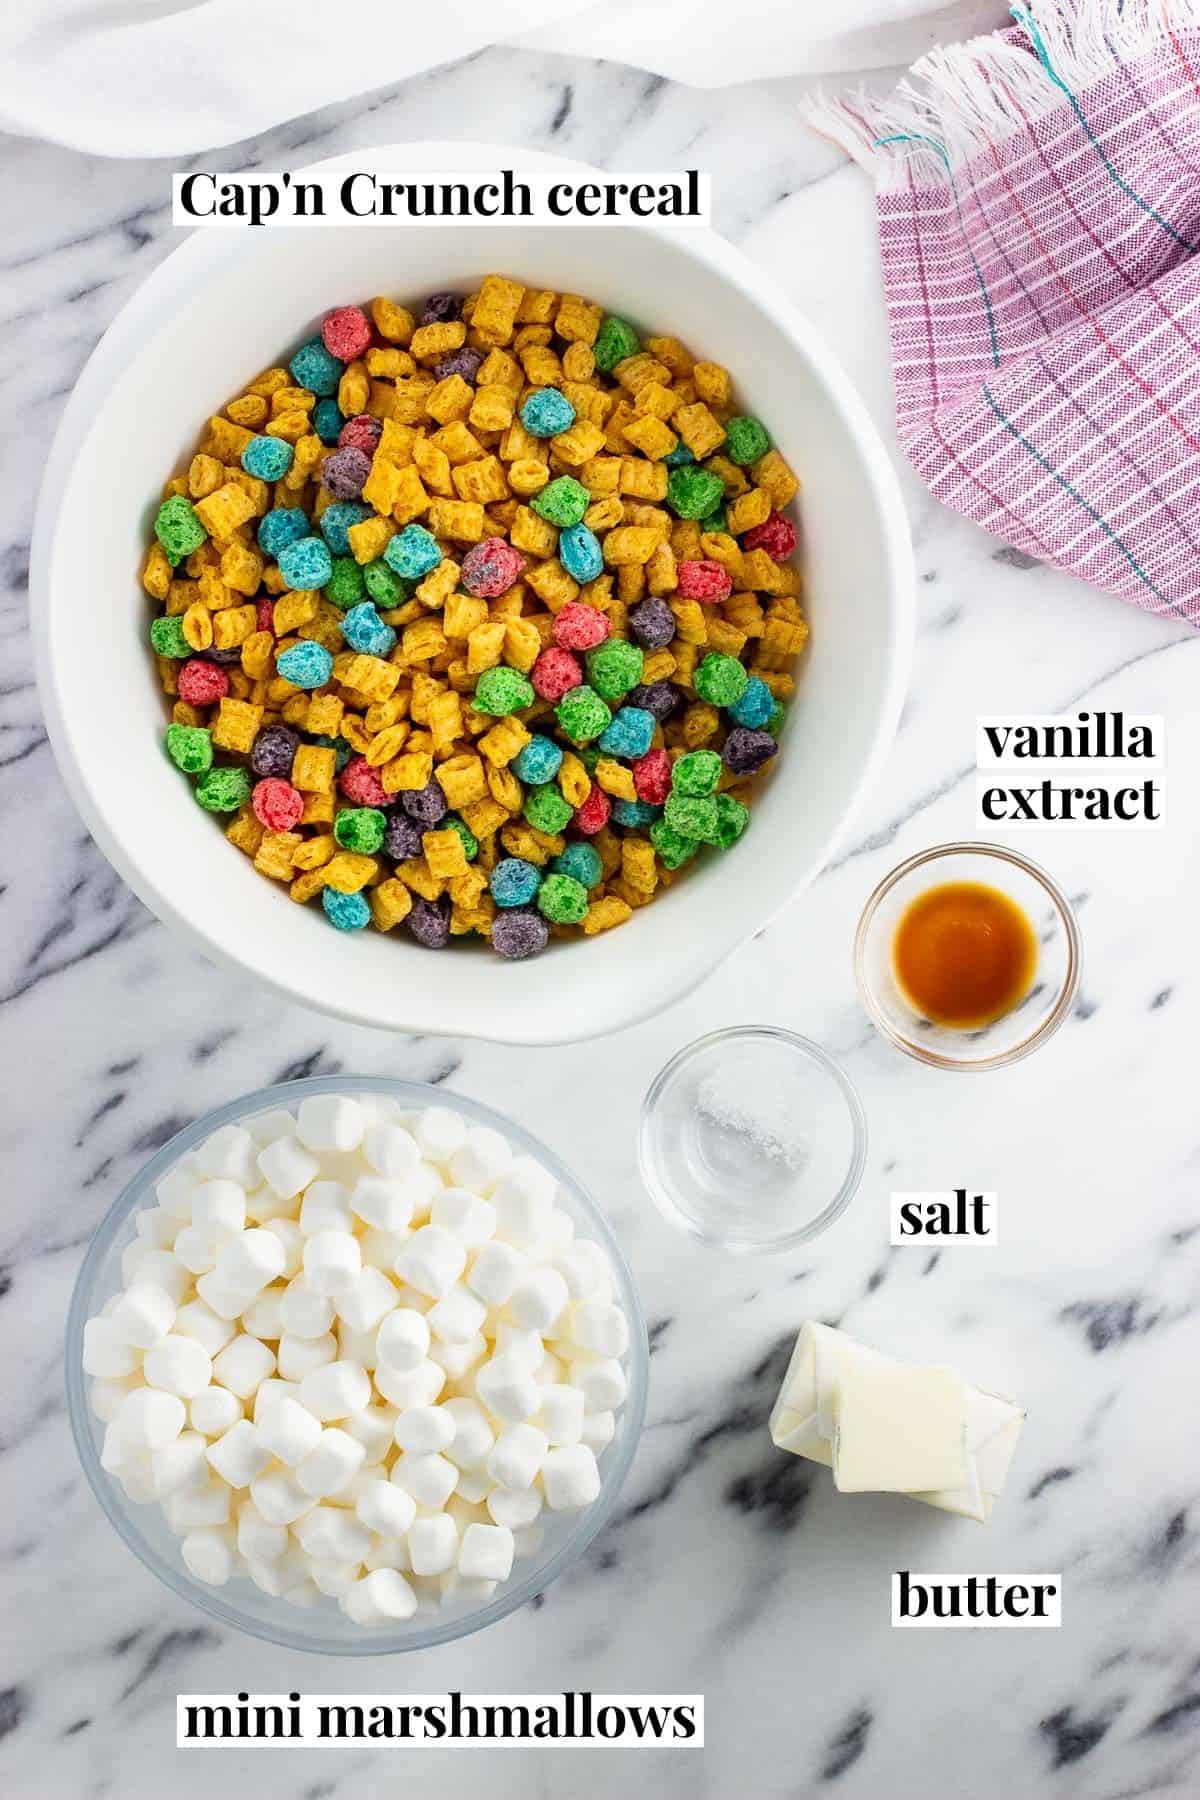 Labeled recipe ingredients in separate bowls: Cap'n Crunch cereal, vanilla extract, mini marshmallows, salt, and butter.